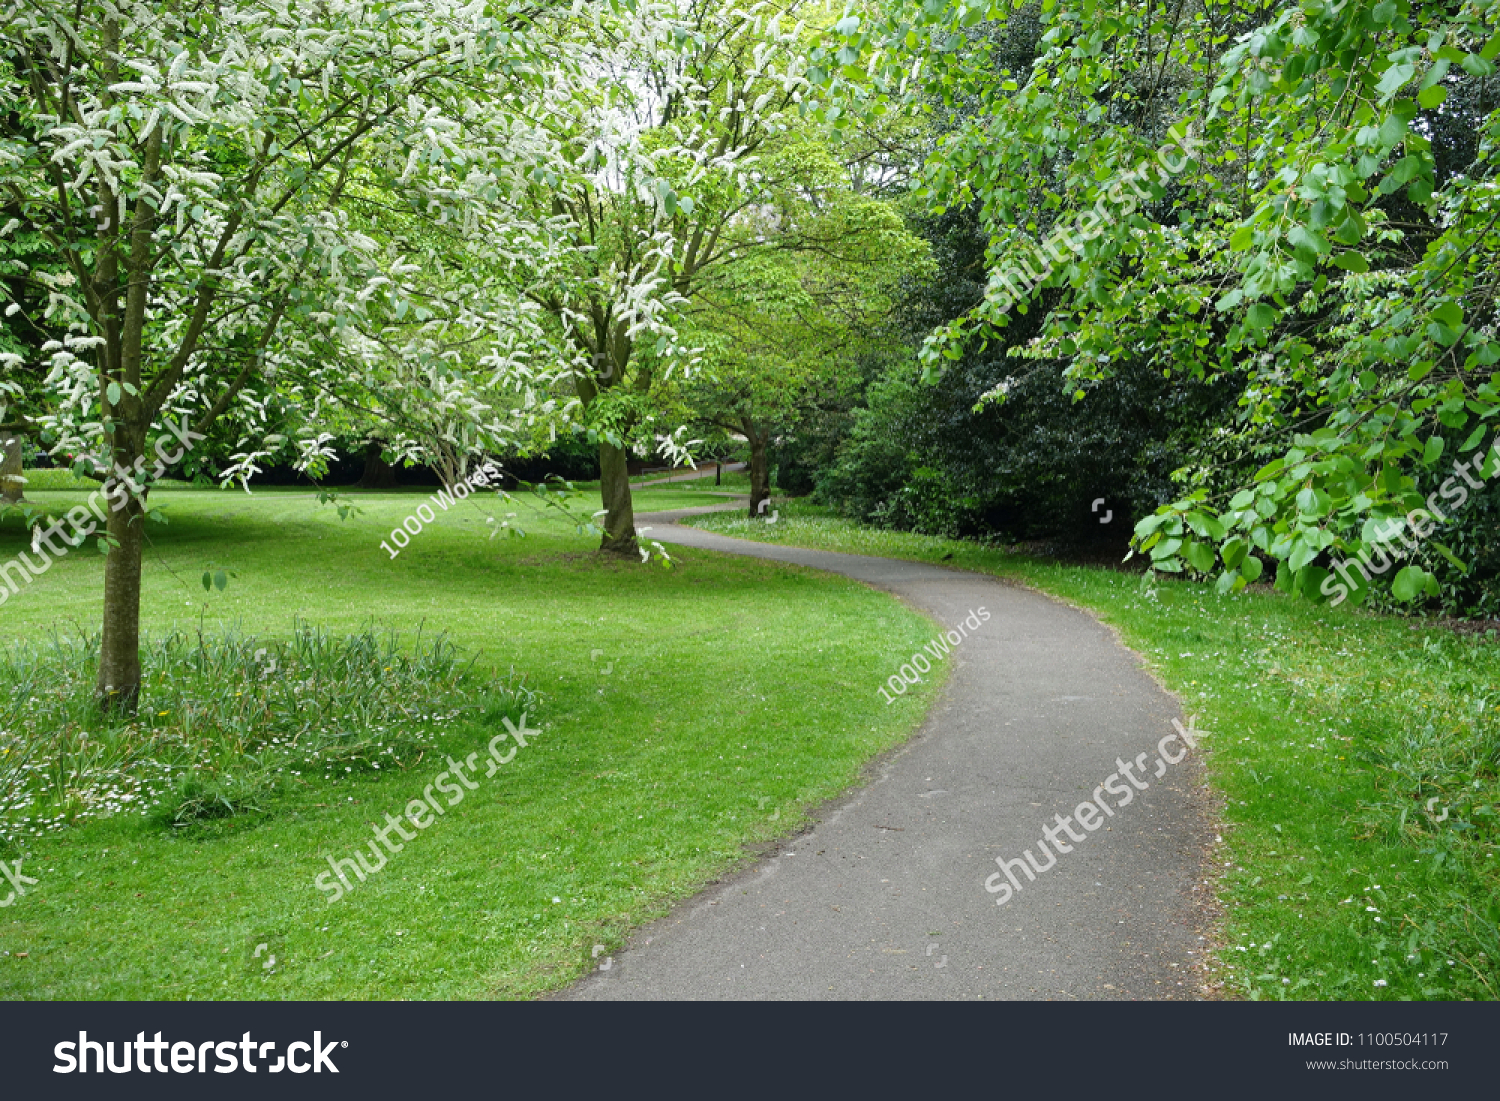 Scenic View of Path through a Beautiful Green Leafy Park Garden #1100504117